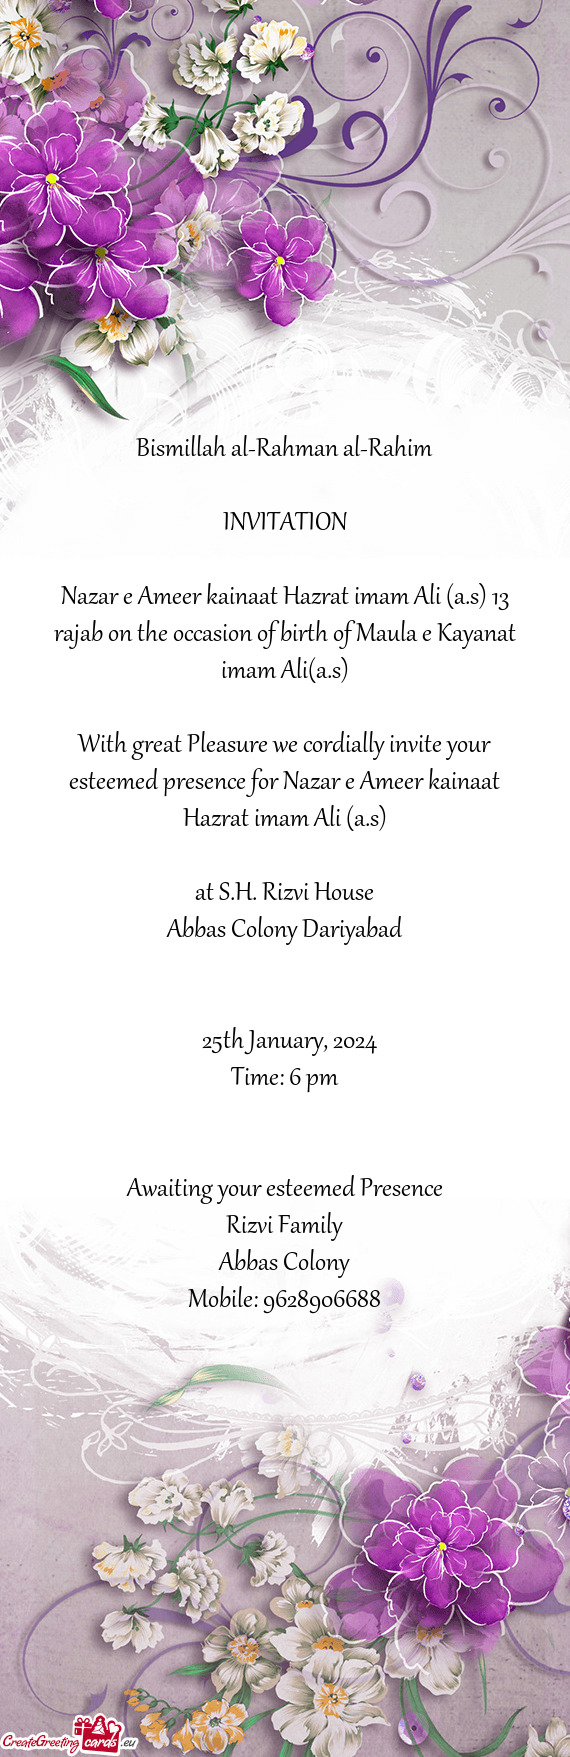 With great Pleasure we cordially invite your esteemed presence for Nazar e Ameer kainaat Hazrat imam